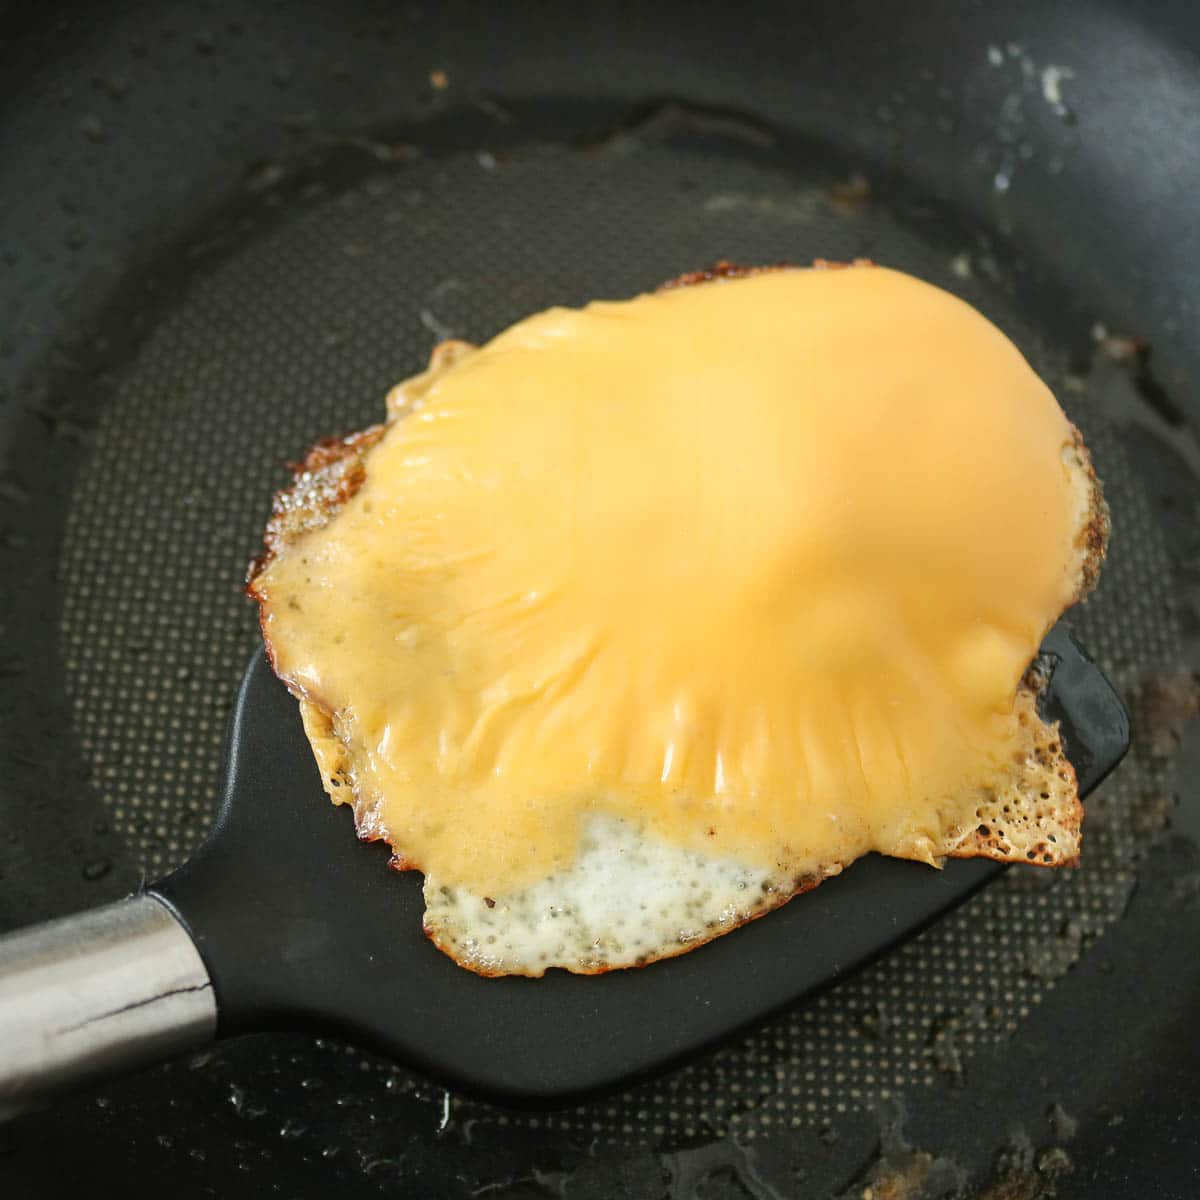 Spatula serving a cheesy fried egg from a frying pan.